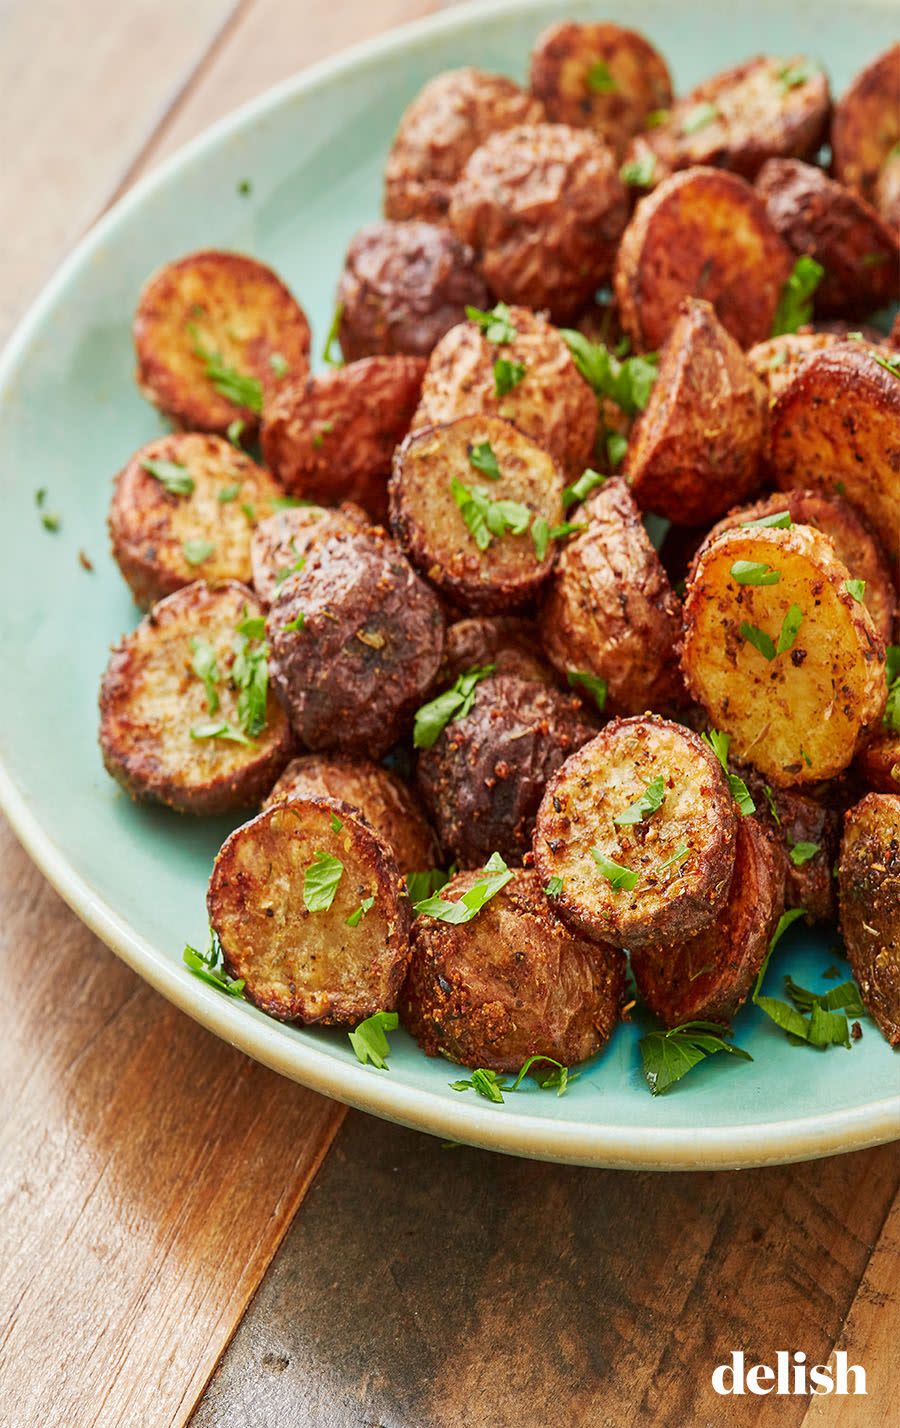 <p>We pride ourselves for how perfect our <a href="https://www.delish.com/cooking/recipe-ideas/a22865719/herb-roasted-potatoes/" rel="nofollow noopener" target="_blank" data-ylk="slk:roasted potatoes" class="link ">roasted potatoes</a> are. We truly though they couldn't get be better, but it turns out the <a href="https://www.delish.com/cooking/g4711/air-fryer-recipes/?gclid=Cj0KCQjw4PKTBhD8ARIsAHChzRK11KFSlLqaGG6xTfGGJwezXGxKYfeYCtO1l75K1taoEFEmSj188ekaAm9gEALw_wcB" rel="nofollow noopener" target="_blank" data-ylk="slk:air fryer" class="link ">air fryer</a> works some kind of magic on potatoes. They get extra crispy all over and stay perfectly soft on the inside. Toss them in just a little bit of oil so all of the seasonings stick to make these the most addicting potatoes ever. </p><p>Get the <strong><a href="https://www.delish.com/cooking/recipe-ideas/a28414561/air-fryer-potatoes-recipe/" rel="nofollow noopener" target="_blank" data-ylk="slk:Air Fryer Crispy Potatoes recipe" class="link ">Air Fryer Crispy Potatoes recipe</a>. </strong></p>